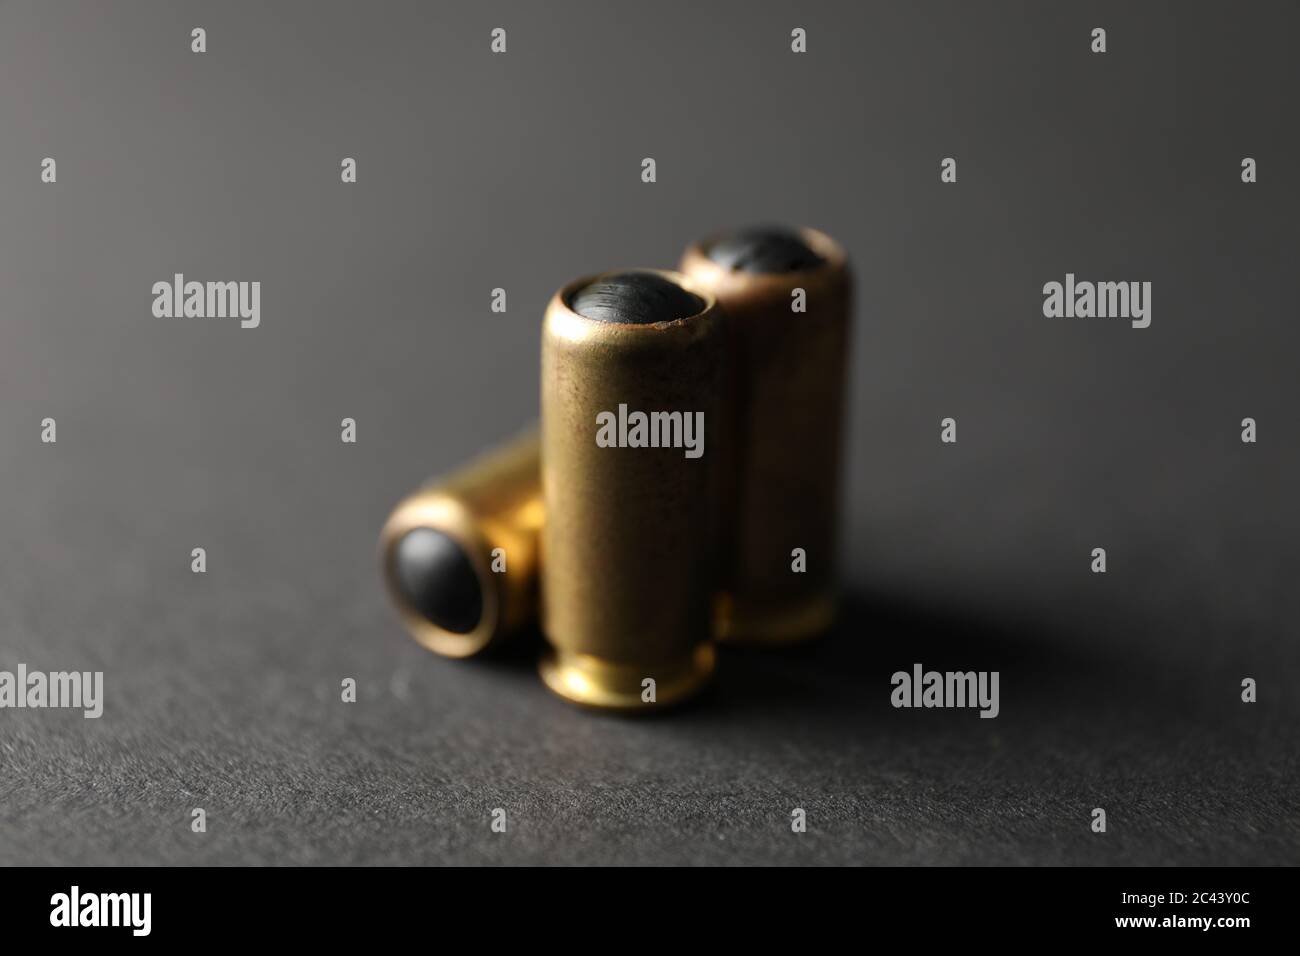 Rubber bullets on black background, close up Stock Photo